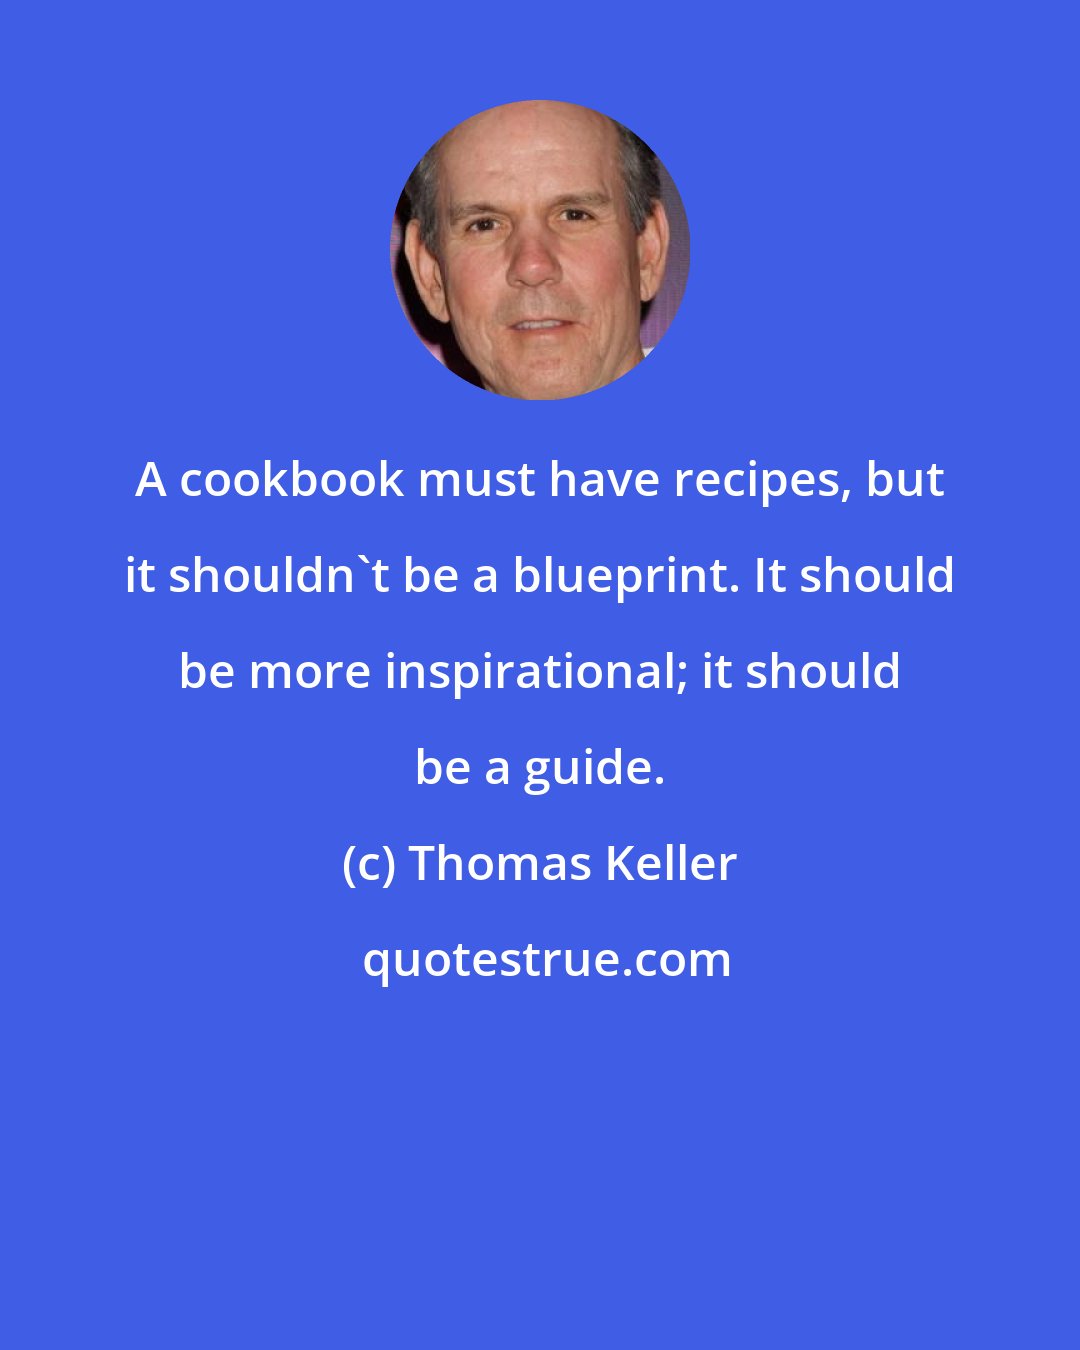 Thomas Keller: A cookbook must have recipes, but it shouldn't be a blueprint. It should be more inspirational; it should be a guide.